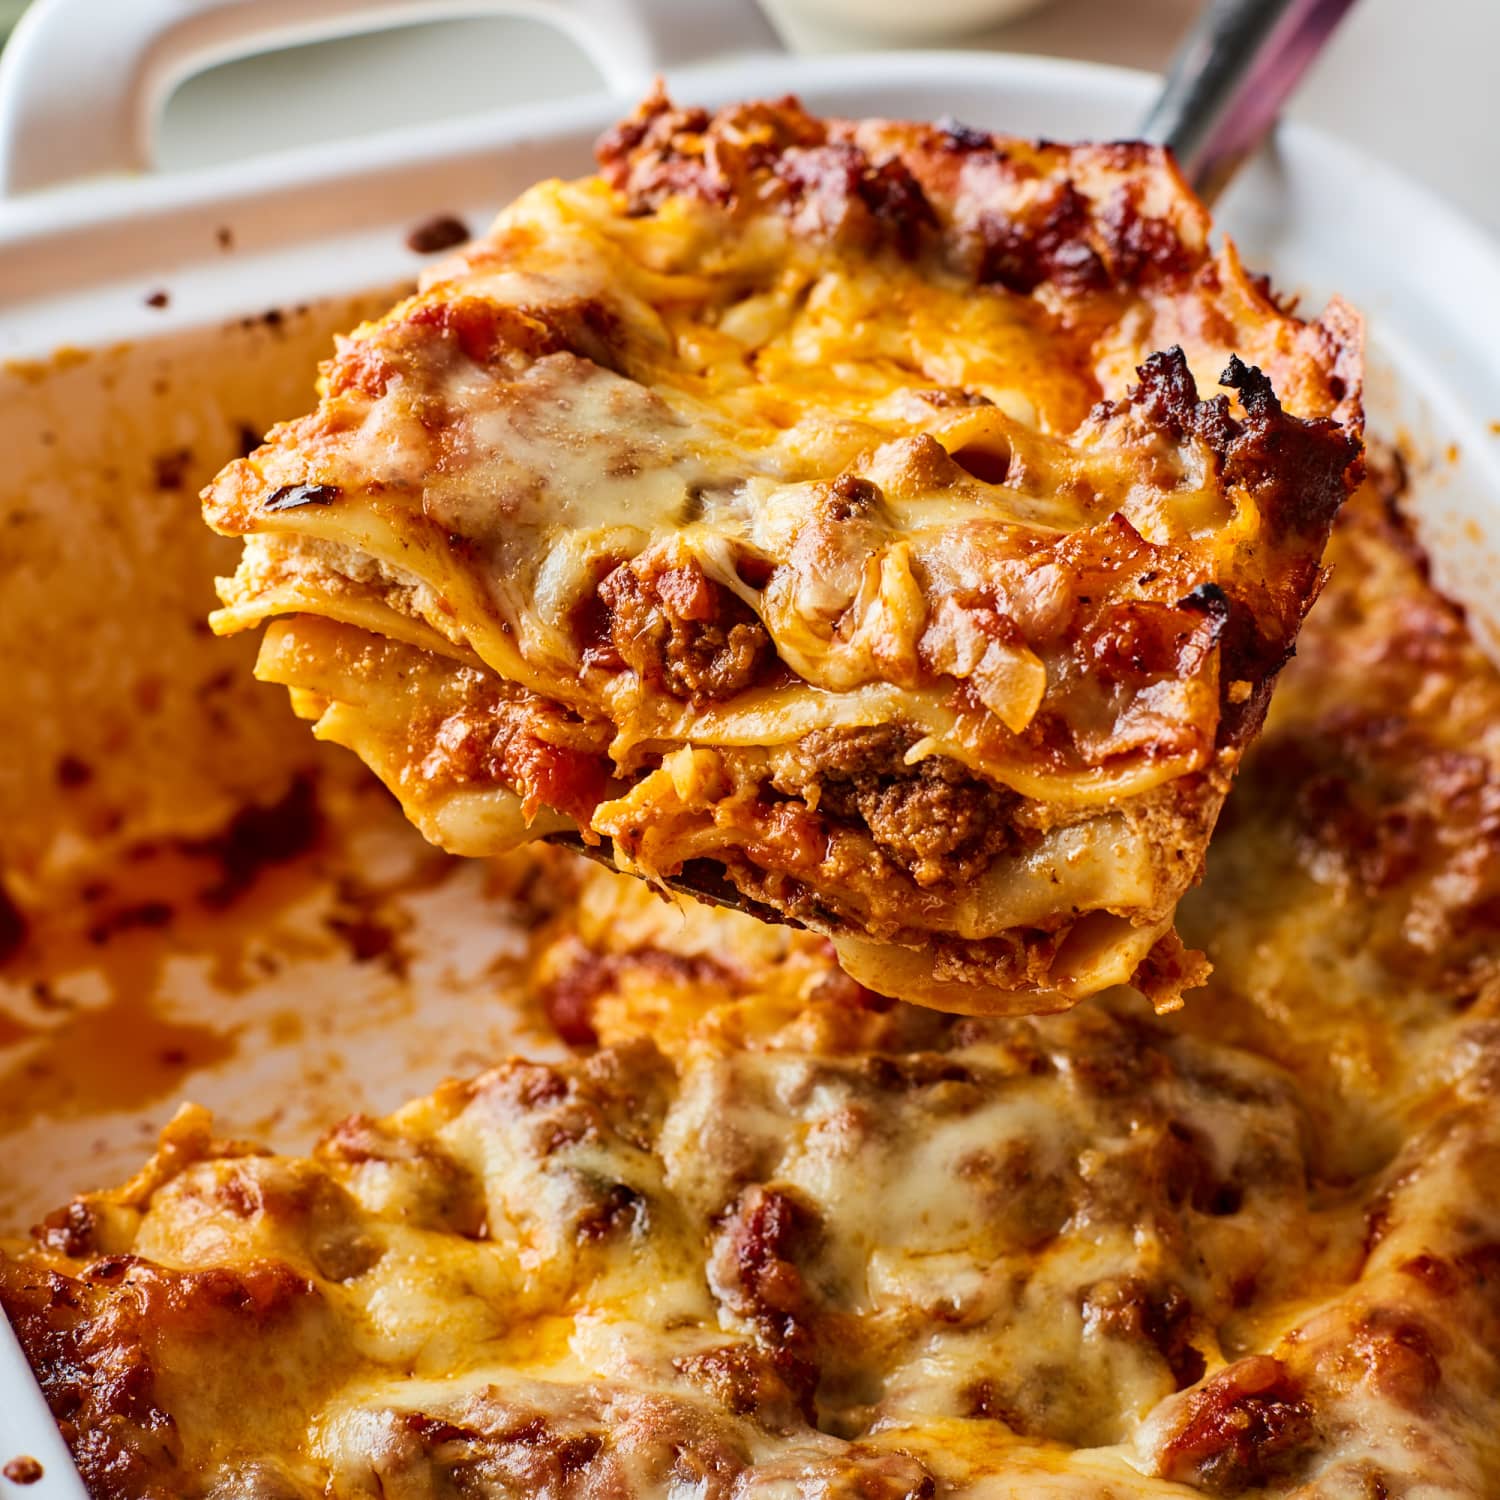 Can You Layer Lasagna In Advance? Tips For Preparing Ahead